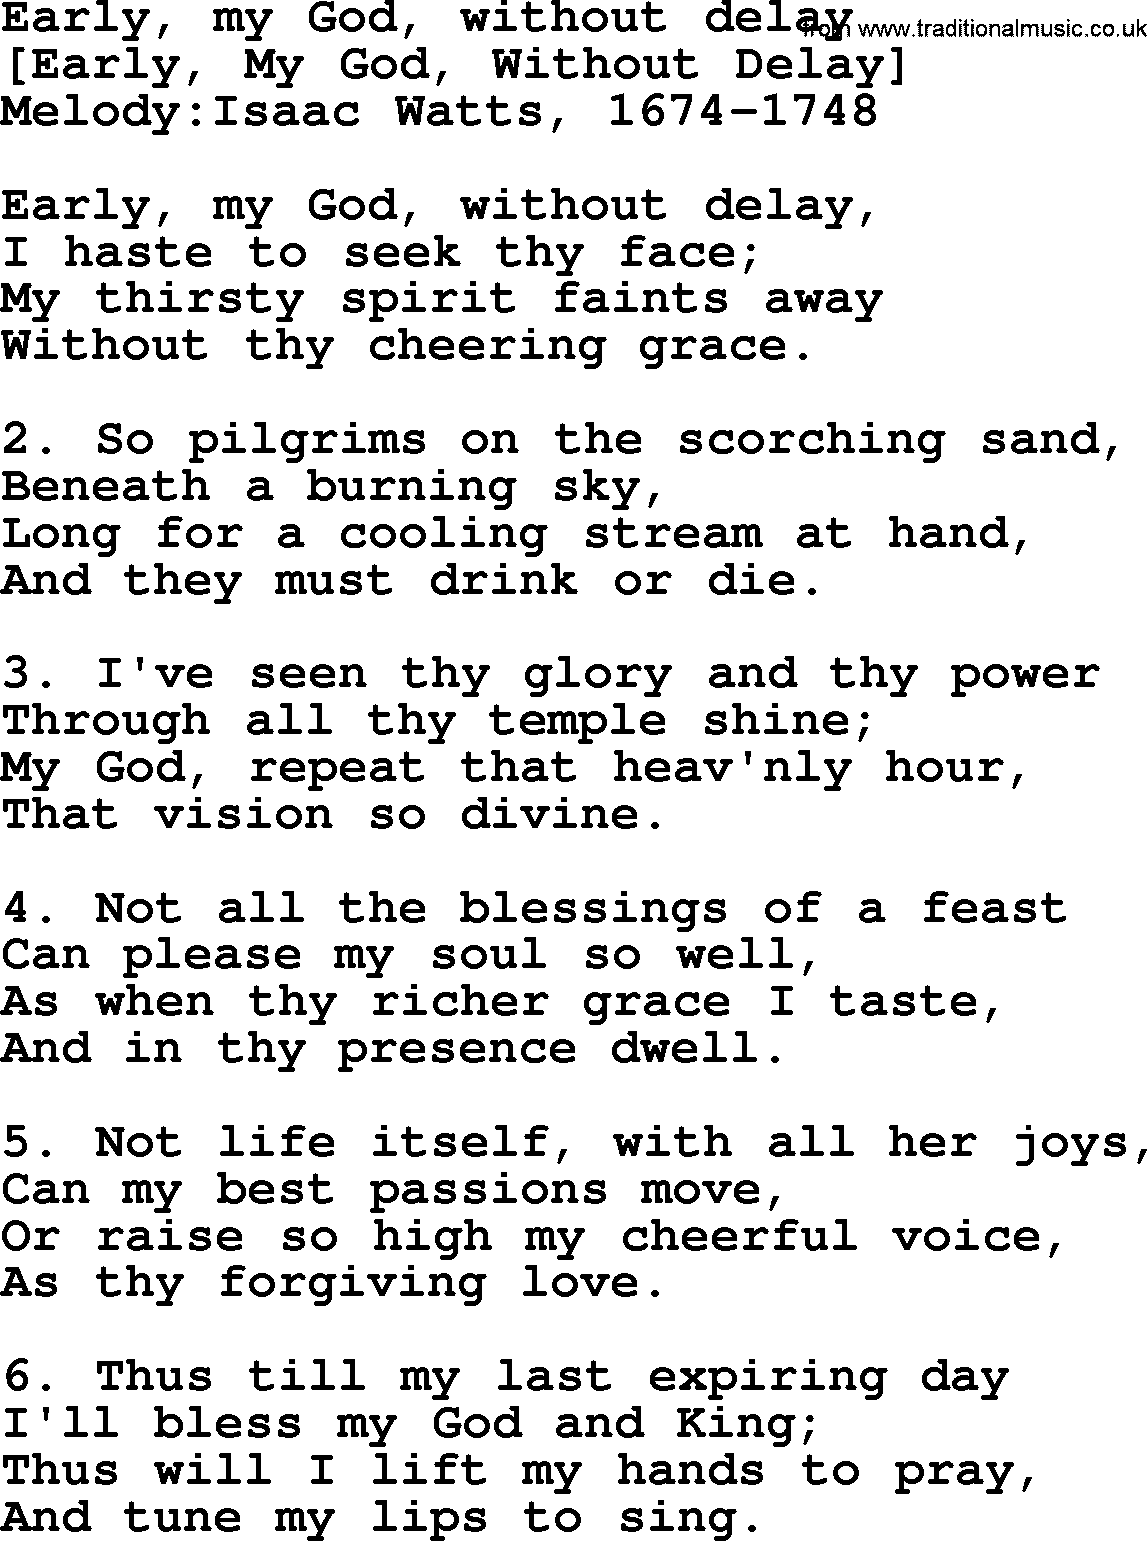 Old English Song: Early, My God, Without Delay lyrics